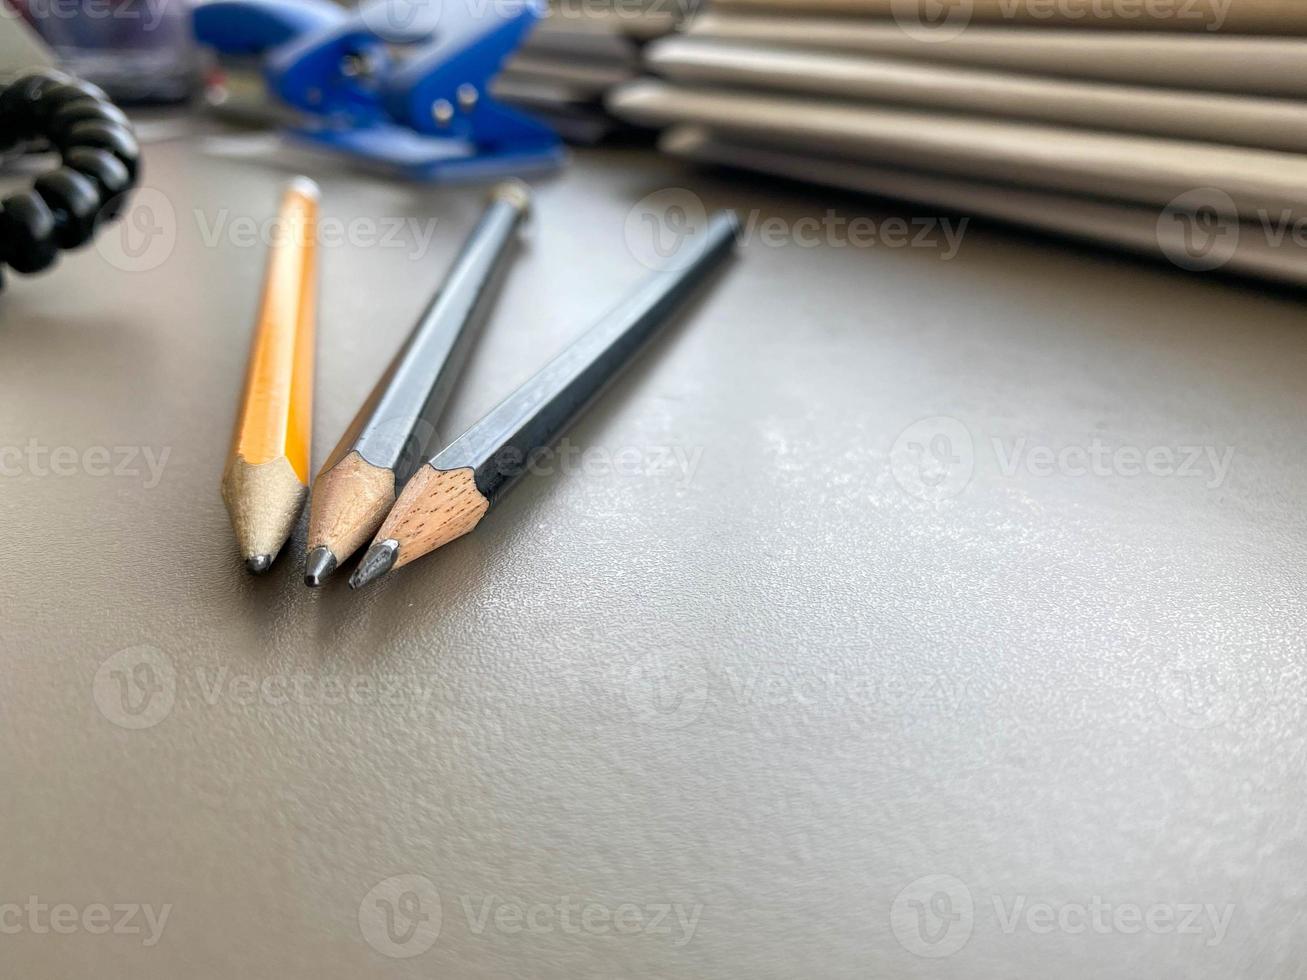 Three pencils lie sharply sharpened next to folders with sheets of paper and documents on the working business desk in the office. Stationery photo